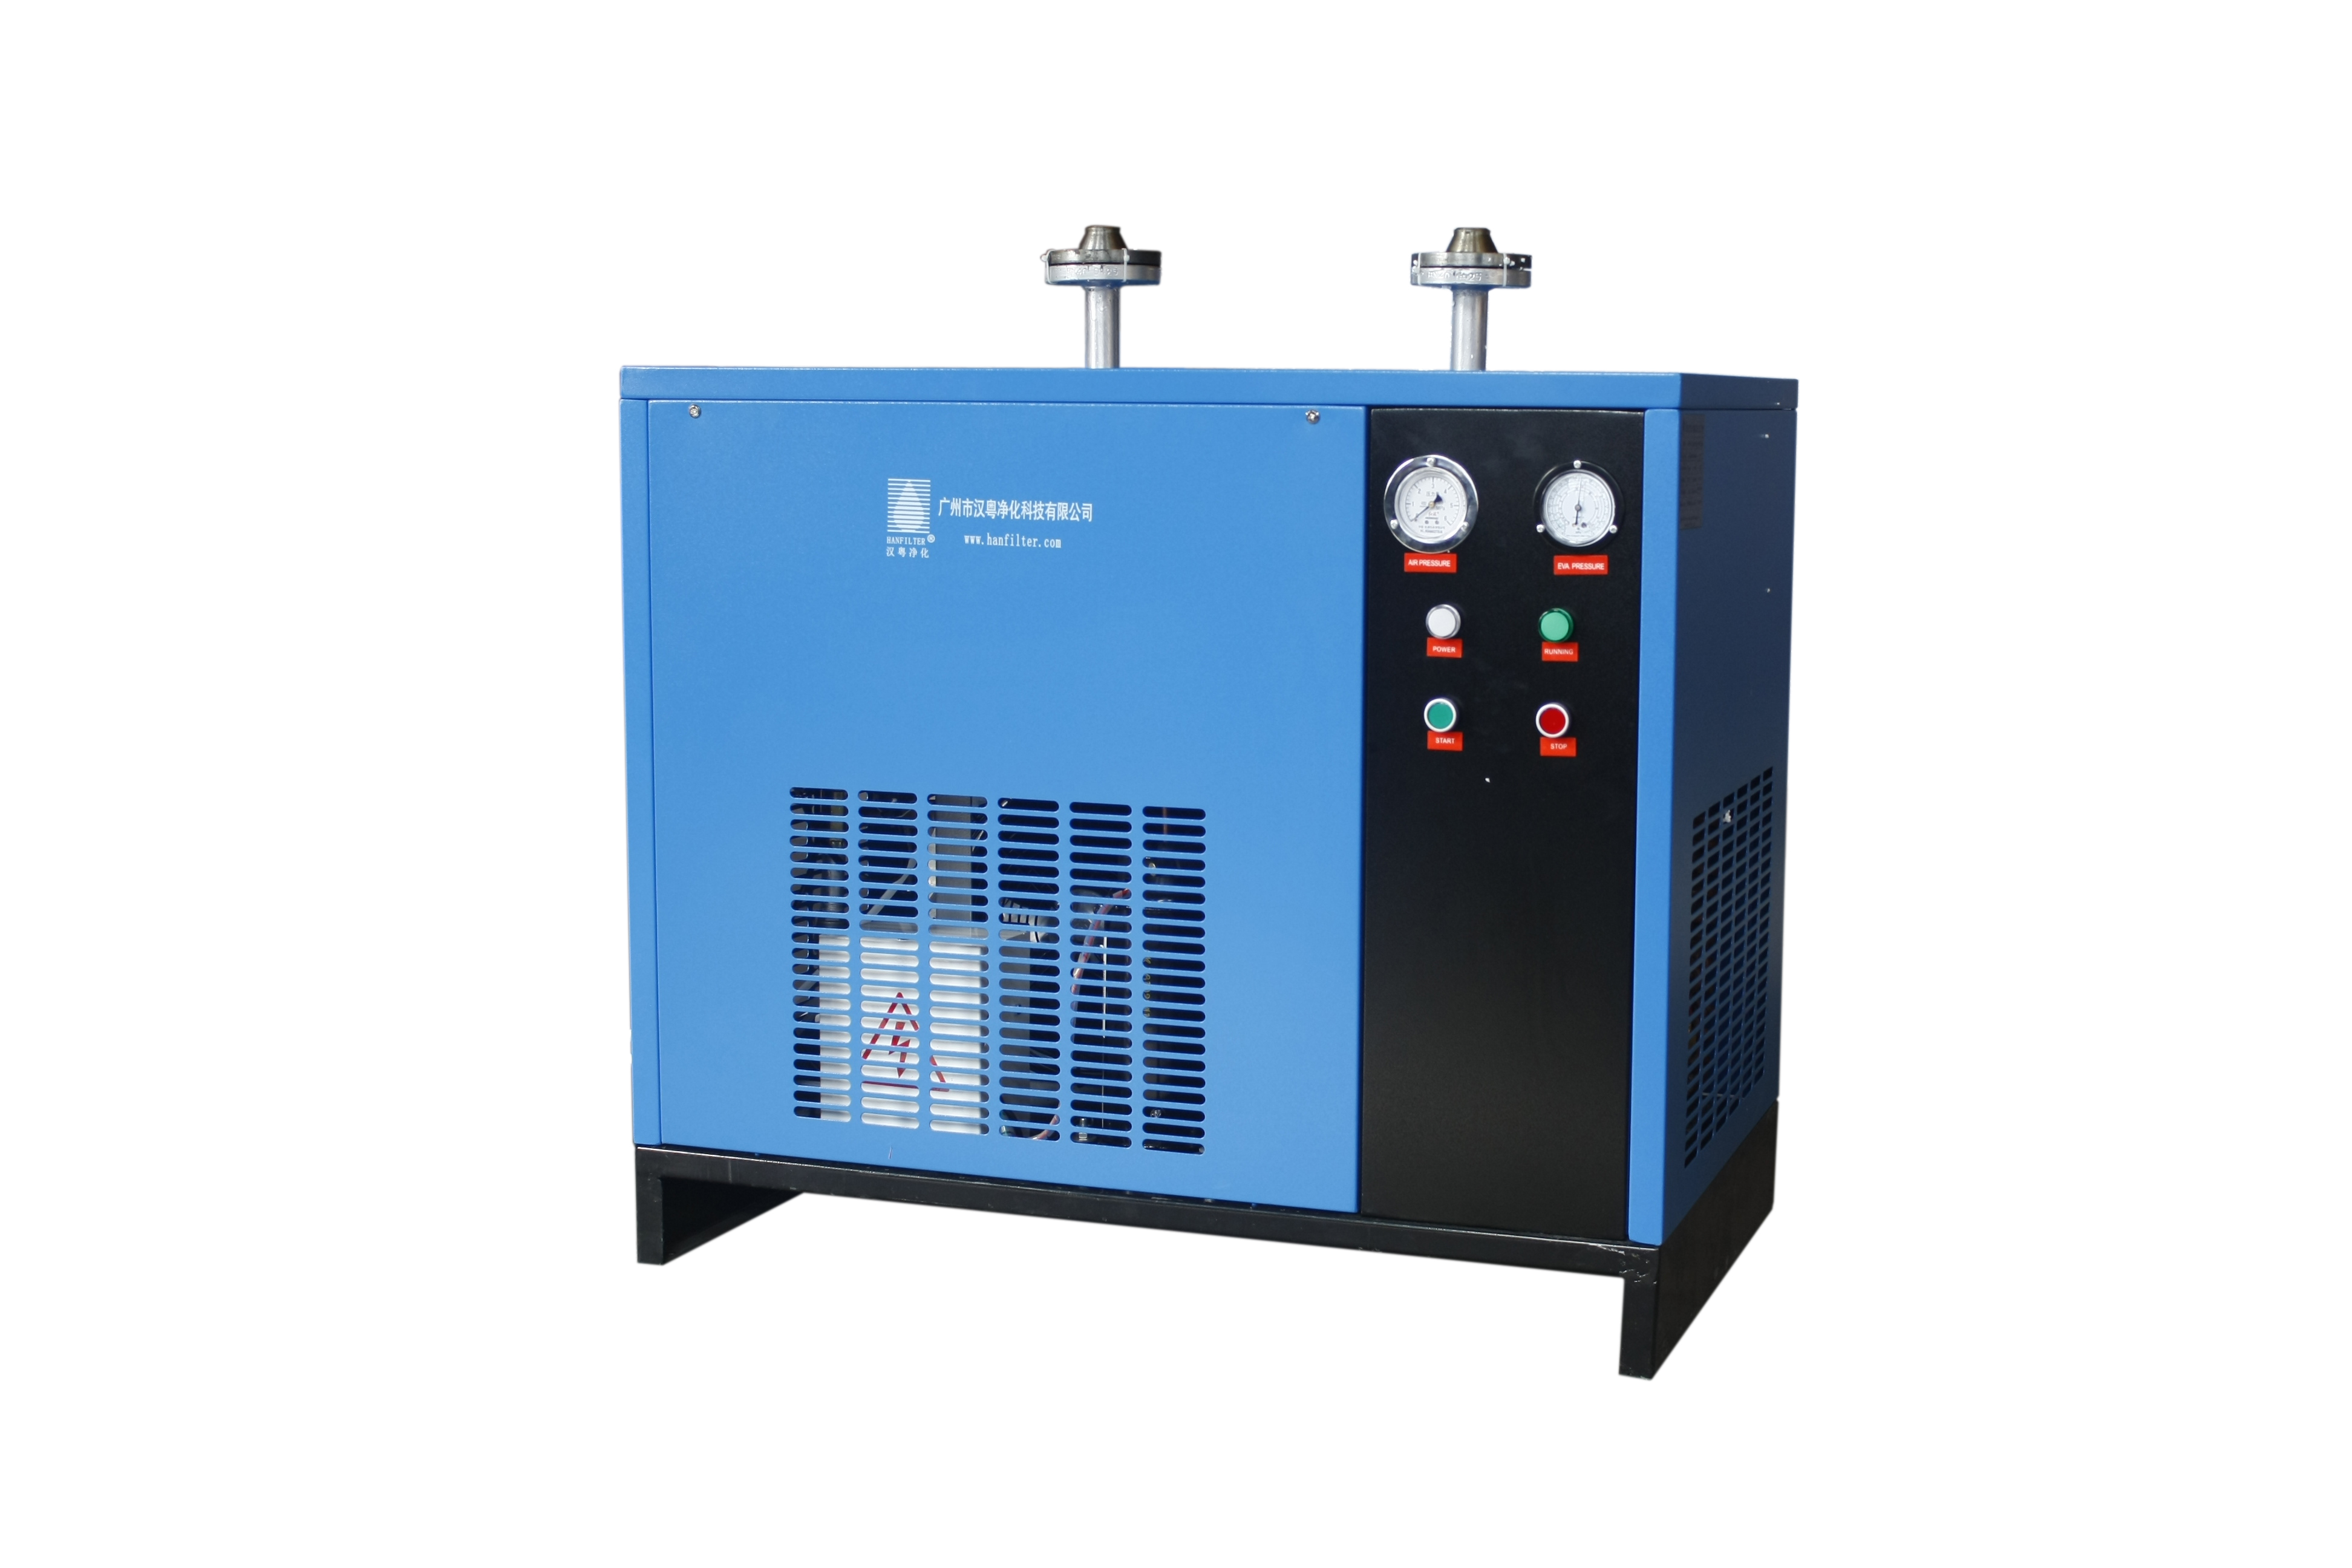 Hanfilter High Pressure Refrigerated Air Dryer (PET industry)